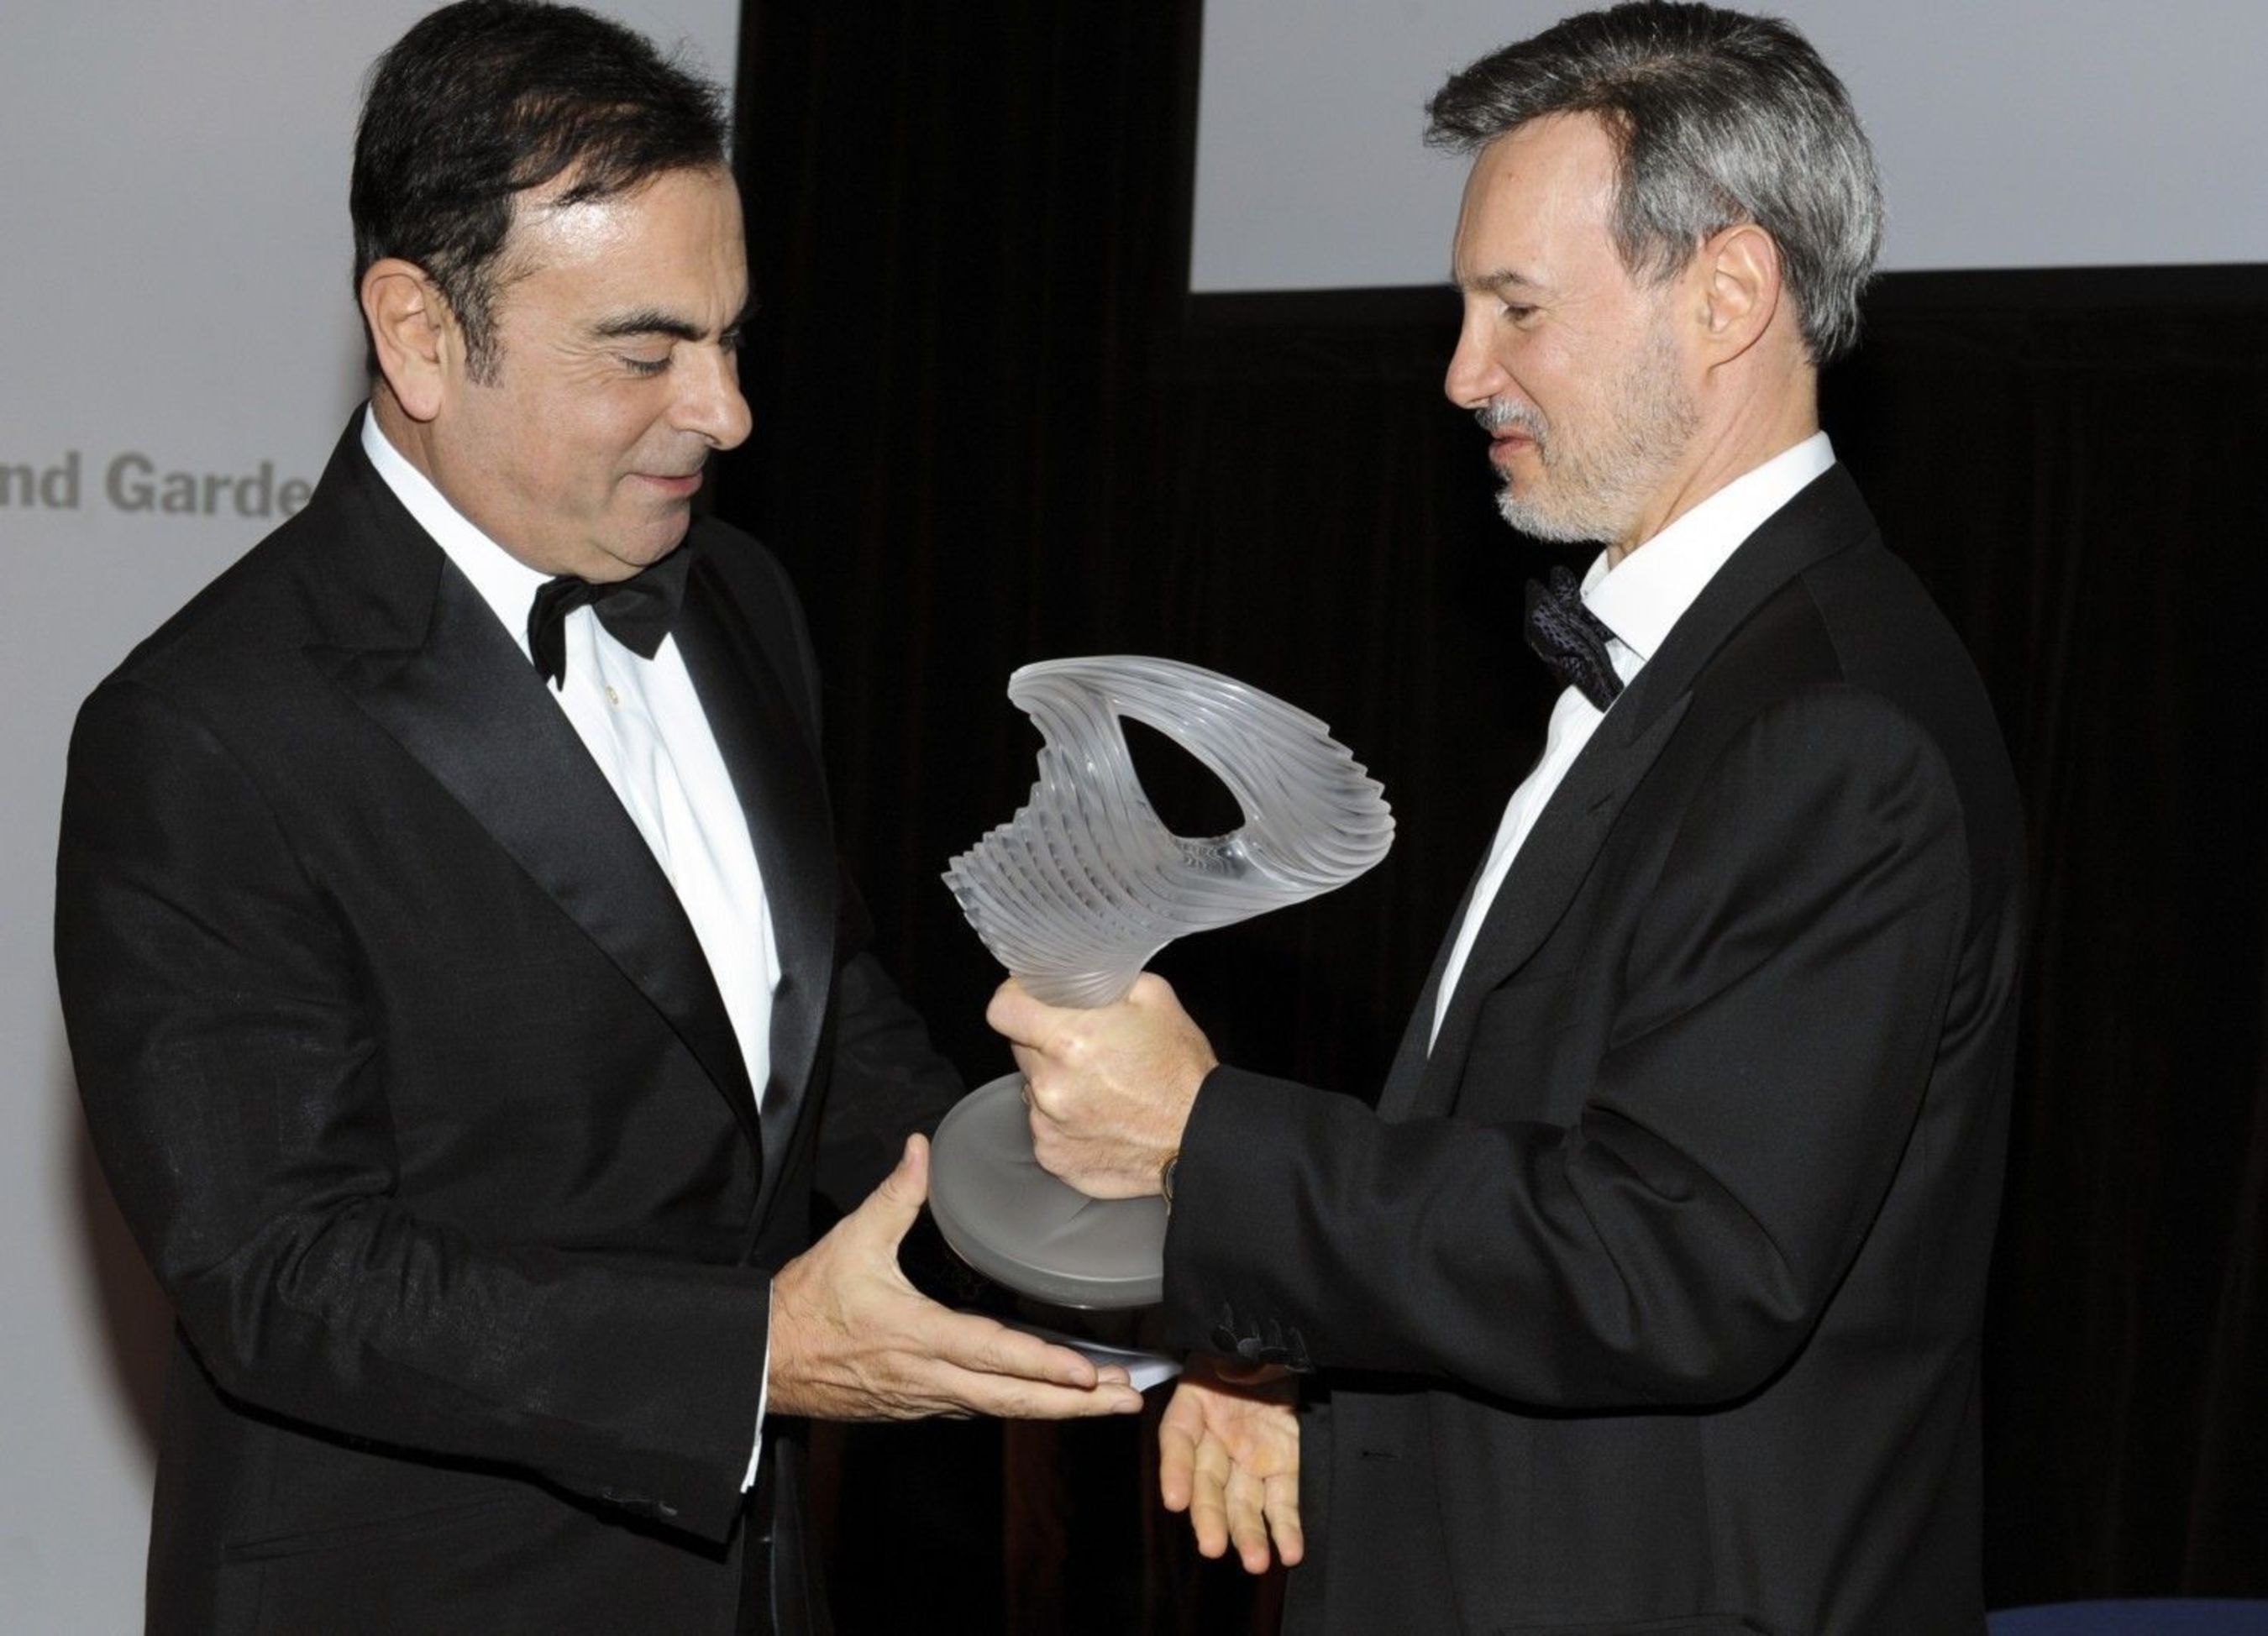 Carlos Ghosn, CEO of the Renault-Nissan Alliance, receives Action Against Hungerâeuro(TM)s Humanitarian Award at the organizationâeuro(TM)s annual gala Thursday night at the Museum of Modern Art in New York. Handing Mr. Ghosn the award is Raymond Debbane, Chairman of the Board of Directors of Action Against Hunger. The group honored Nissan, Renault and the Alliance for their global humanitarian work, including the establishment of an emergency rapid-response fund to assist with humanitarian disasters. Photo by Stephane Kossmann (PRNewsFoto/Renault-Nissan Alliance)